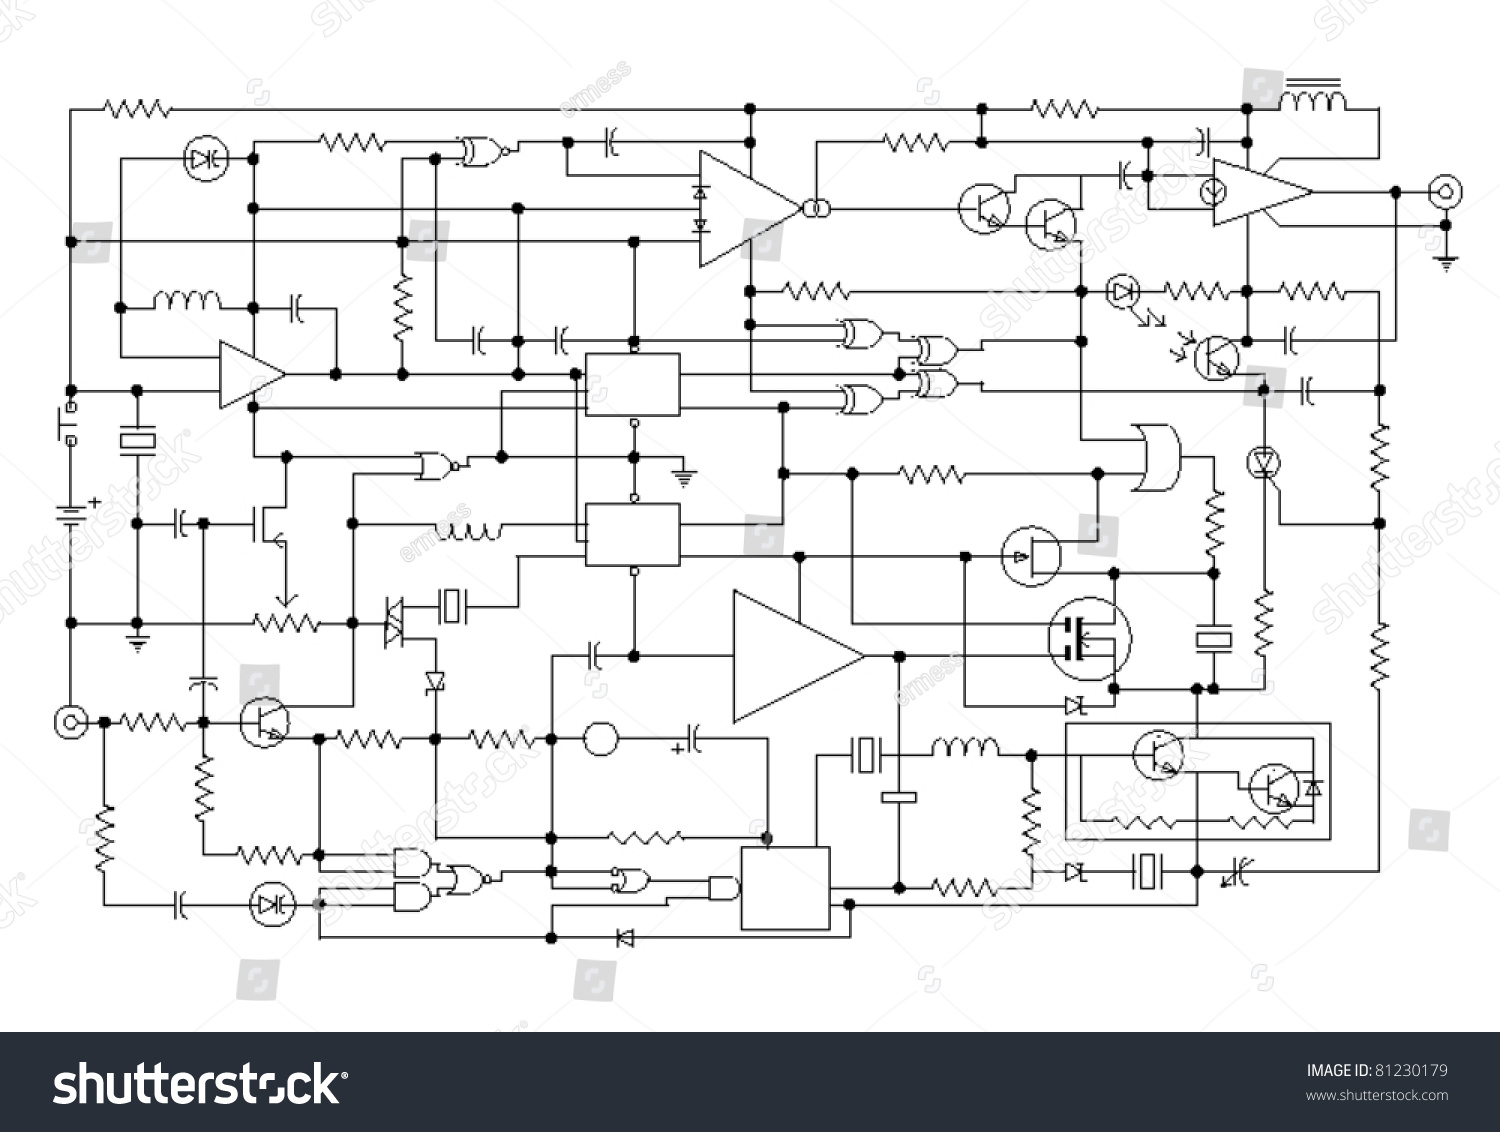 Electronic Components Diagram